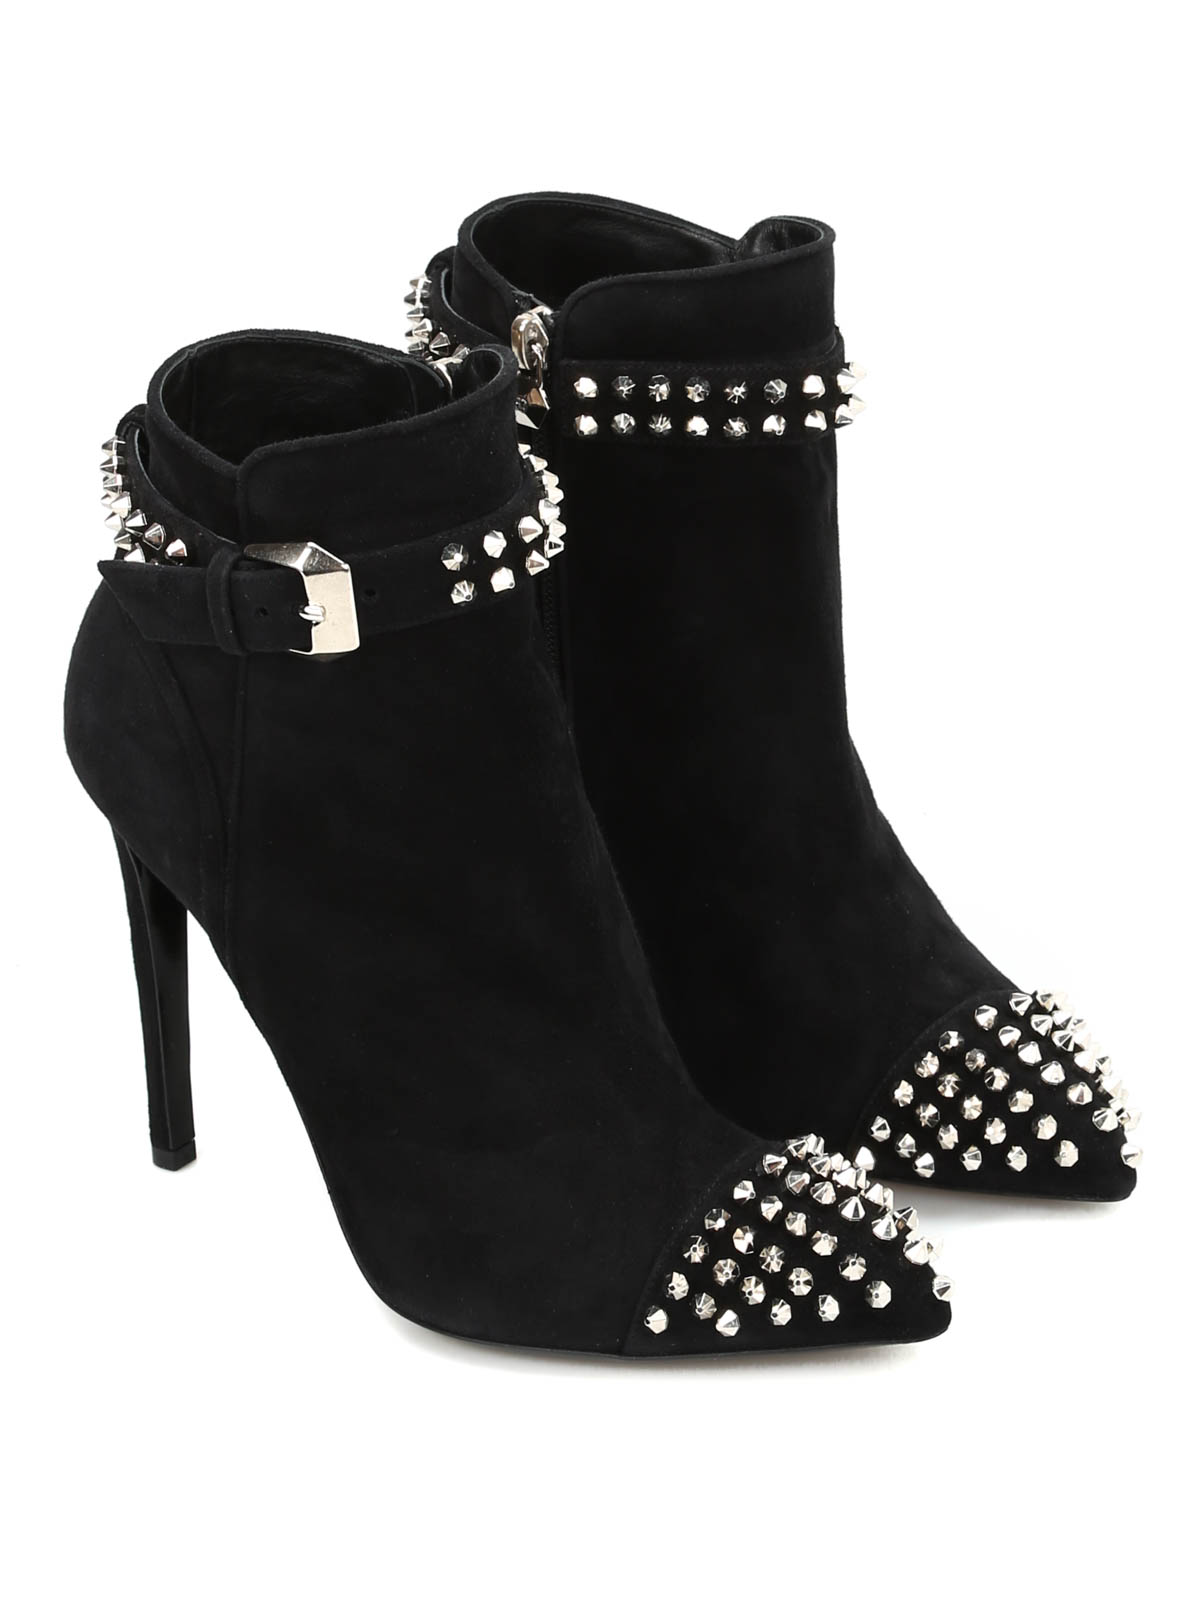 Boo studded suede booties - ankle boots 